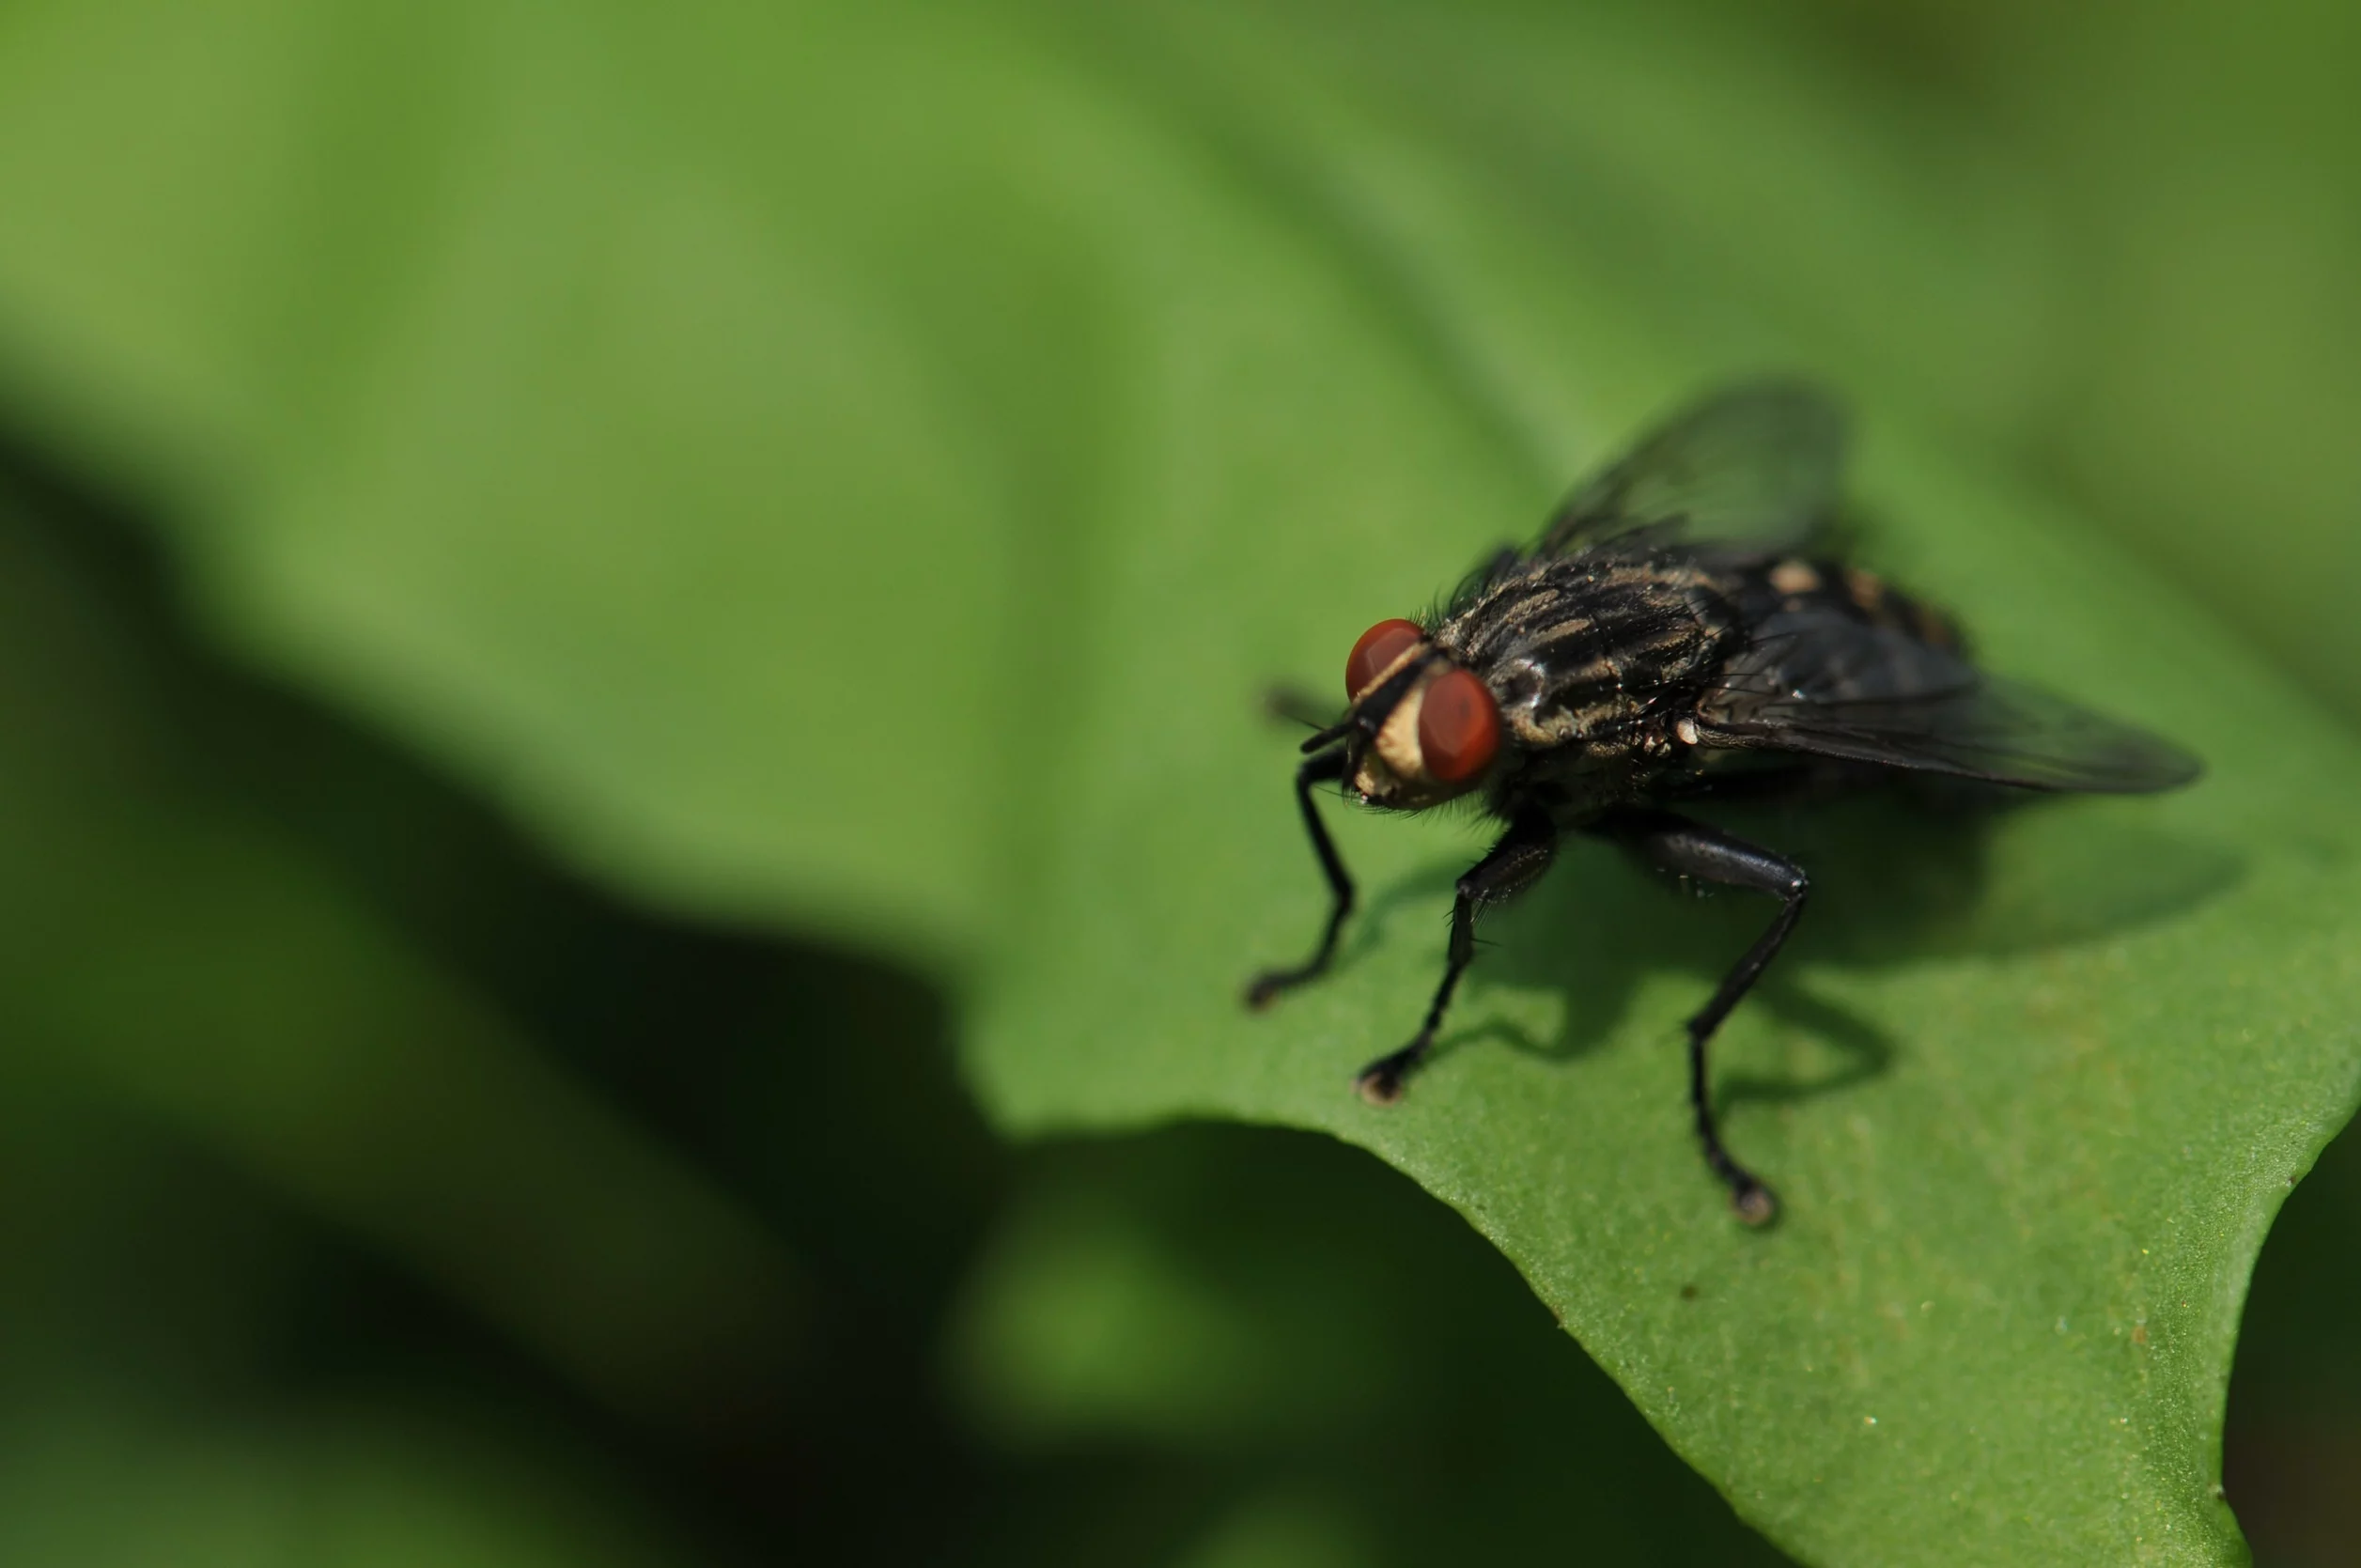 How To Get Rid of Cluster Flies - Cluster Fly Control Guide